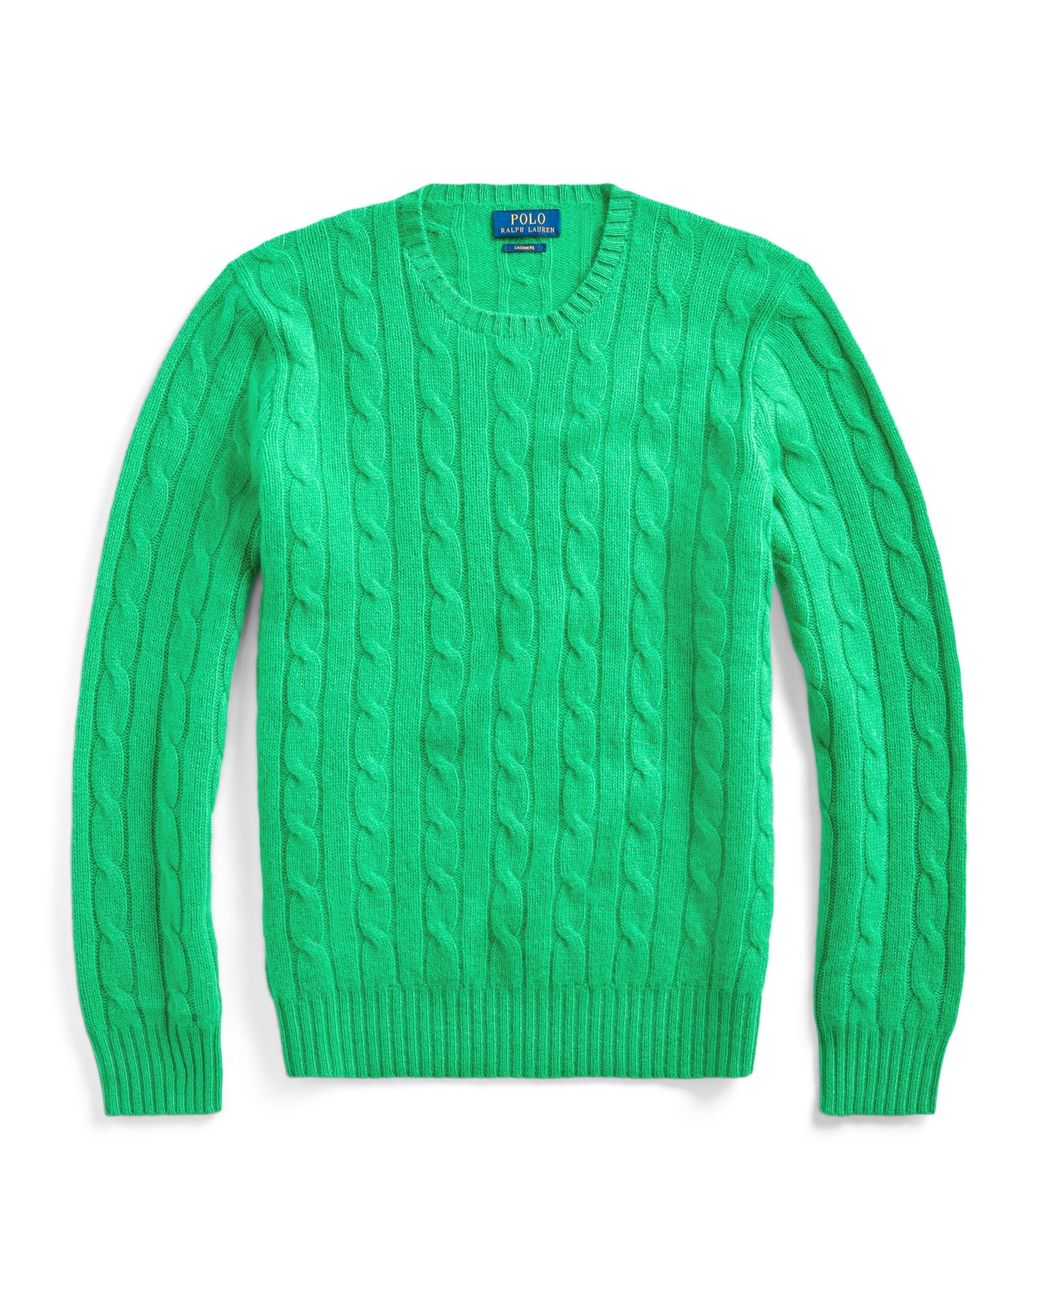 Polo Ralph Lauren Cable-knit Cashmere Sweater in Green for Men - Lyst